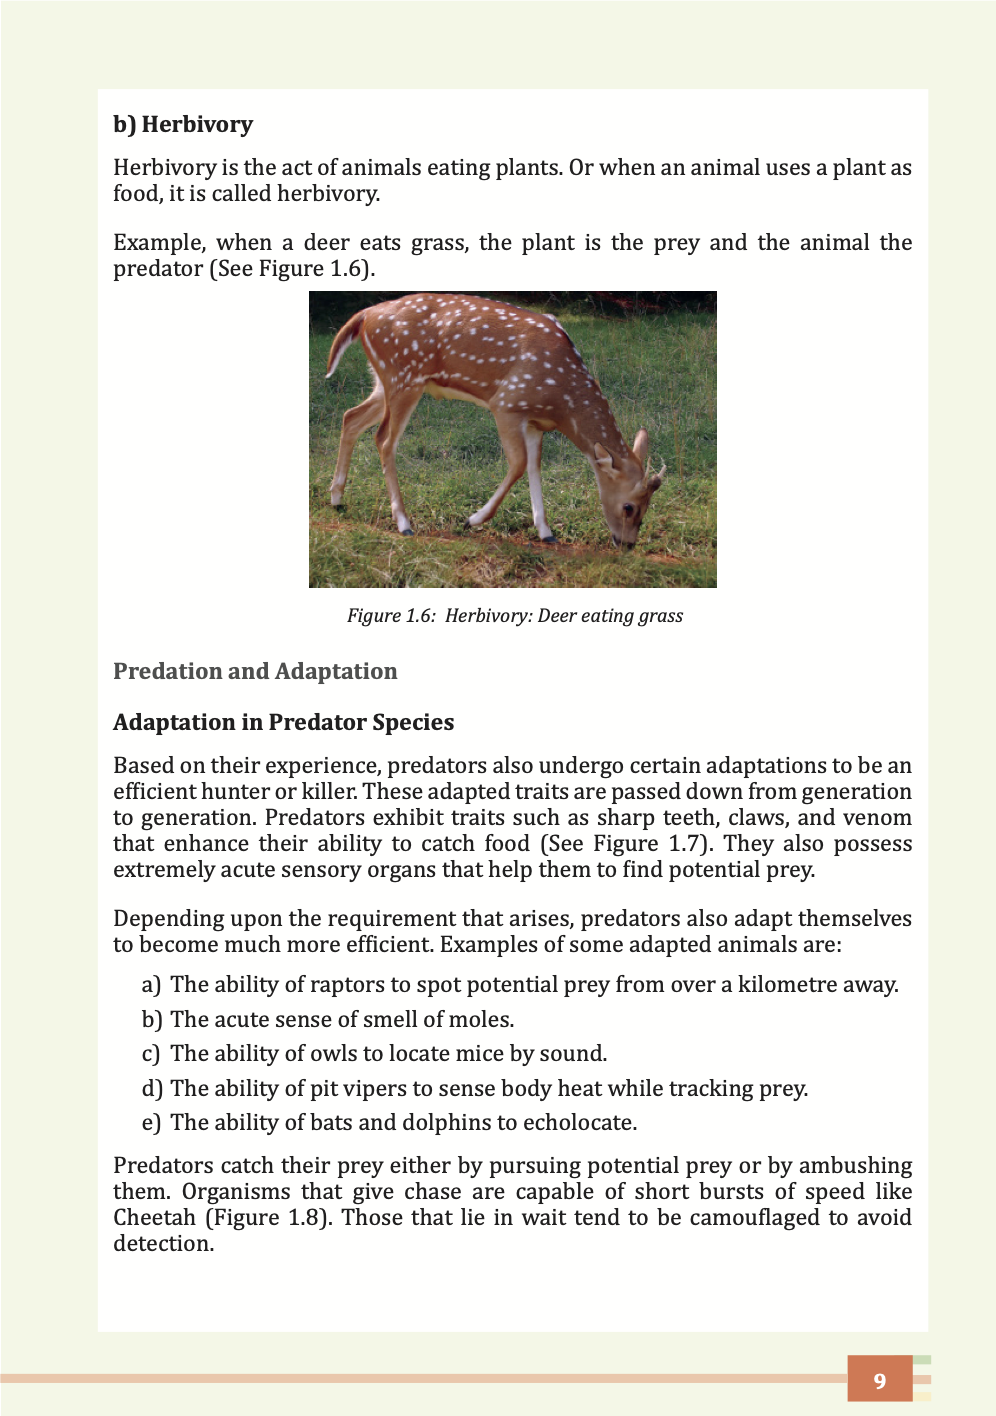 b) Herbivory 


Herbivory is the act of animals eating plants. Or when an animal uses a plant as 
food, it is called herbivory. 

Example, when a deer eats grass, the plant is the prey and the animal the 
predator (See Figure 1.6). 




 Figure 1.6: Herbivory: Deer eating grass

Predation and Adaptation

Adaptation in Predator Species

Based on their experience, predators also undergo certain adaptations to be an 
efficient hunter or killer. These adapted traits are passed down from generation 
to generation. Predators exhibit traits such as sharp teeth, claws, and venom 
that enhance their ability to catch food (See Figure 1.7). They also possess 
extremely acute sensory organs that help them to find potential prey.

Depending upon the requirement that arises, predators also adapt themselves 
to become much more efficient. Examples of some adapted animals are:

a) The ability of raptors to spot potential prey from over a kilometre away. 
b) The acute sense of smell of moles.
c) The ability of owls to locate mice by sound.
d) The ability of pit vipers to sense body heat while tracking prey.
e) The ability of bats and dolphins to echolocate.


Predators catch their prey either by pursuing potential prey or by ambushing 
them. Organisms that give chase are capable of short bursts of speed like 
Cheetah (Figure 1.8). Those that lie in wait tend to be camouflaged to avoid 
detection.